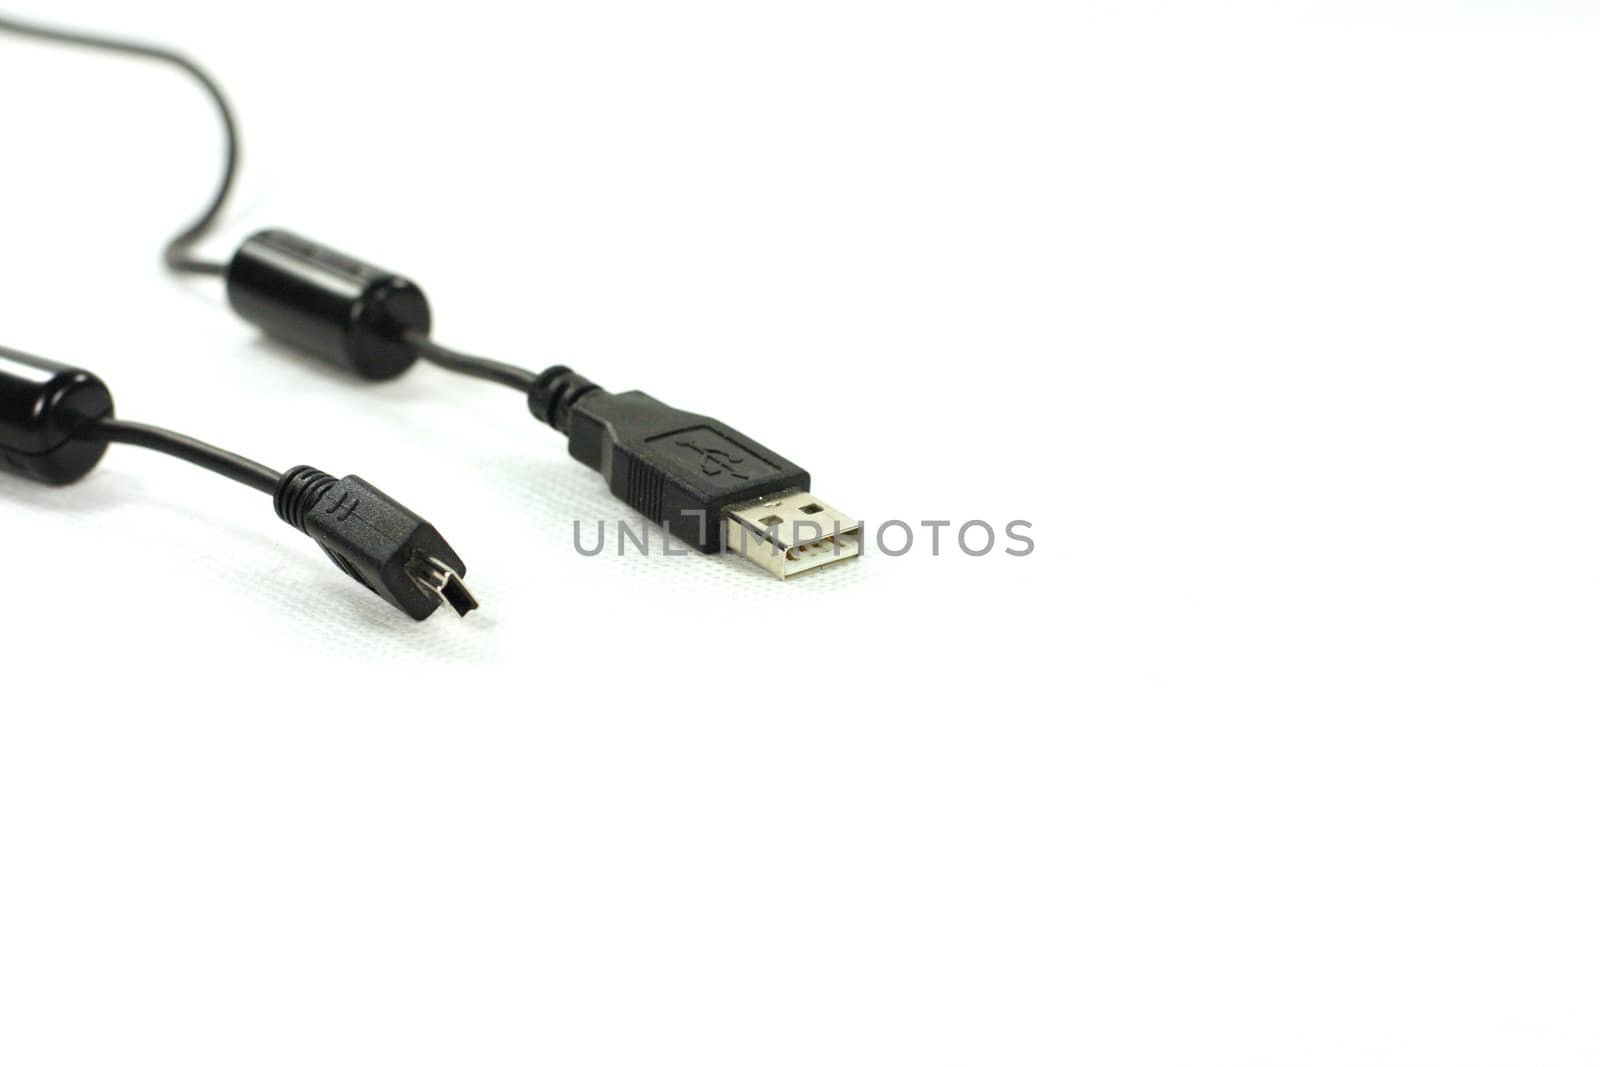 Cable, usb, the tip, electronics,  computer, technologies